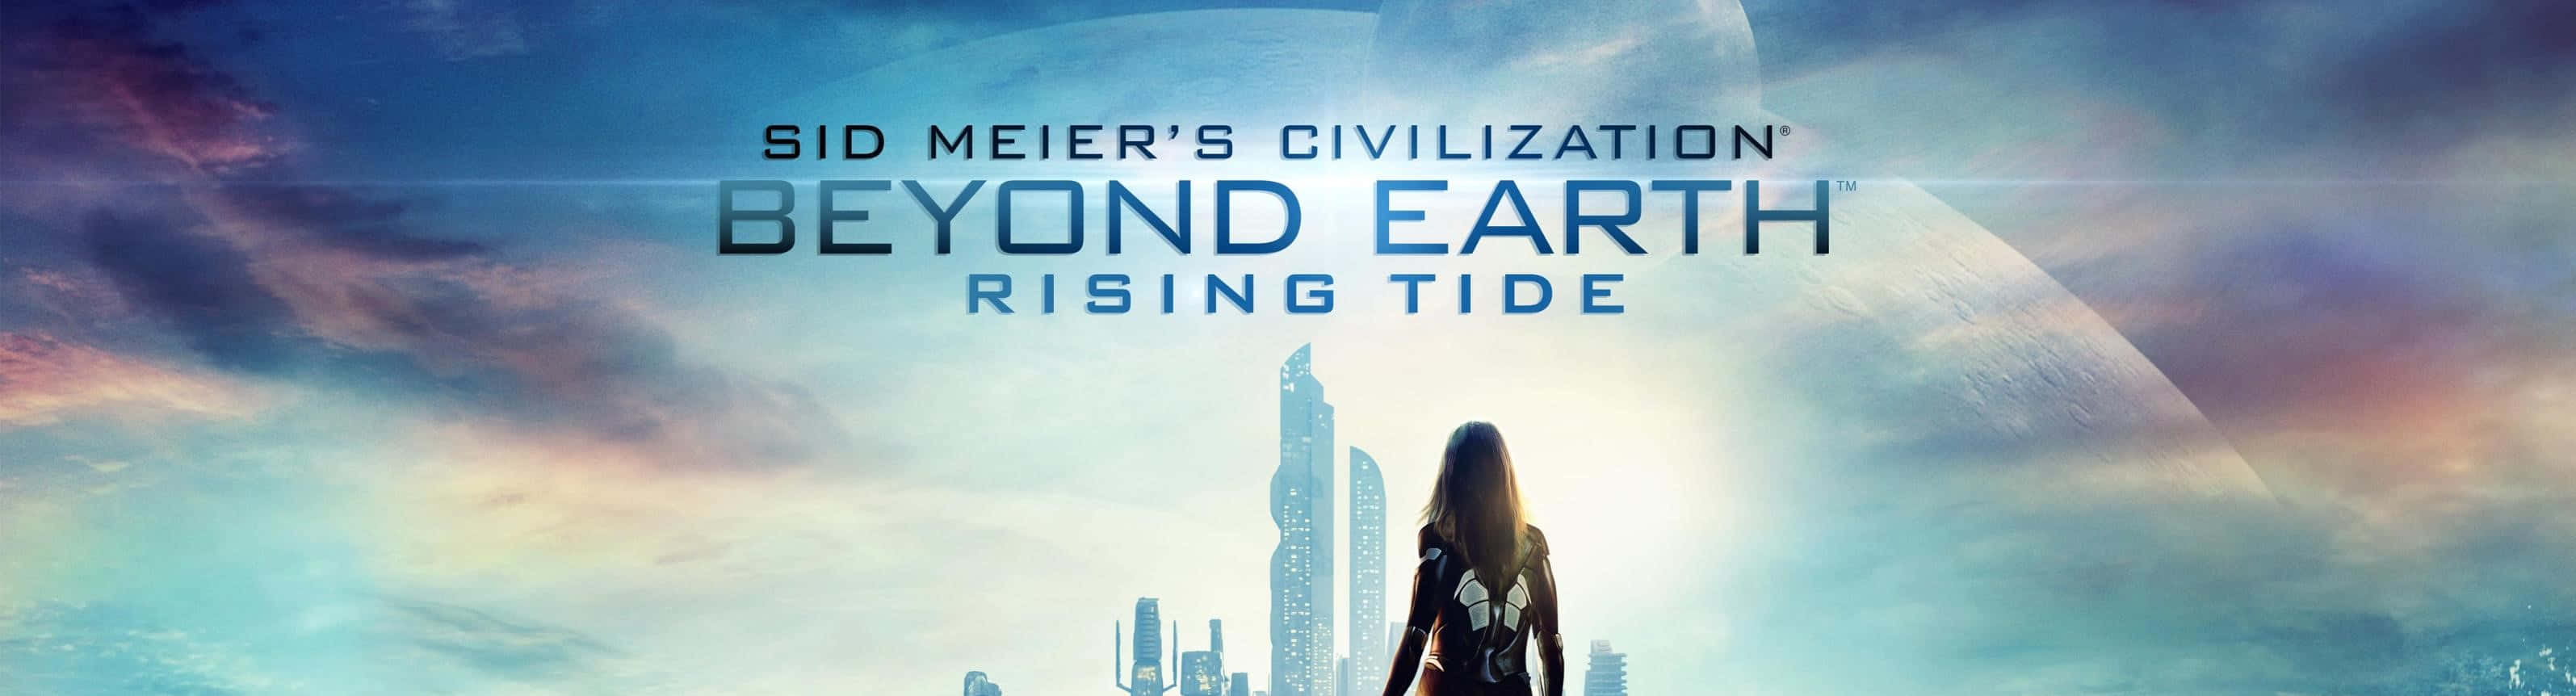 Rising Tide Hybrid Affinities Best Civilization Beyond Earth Background